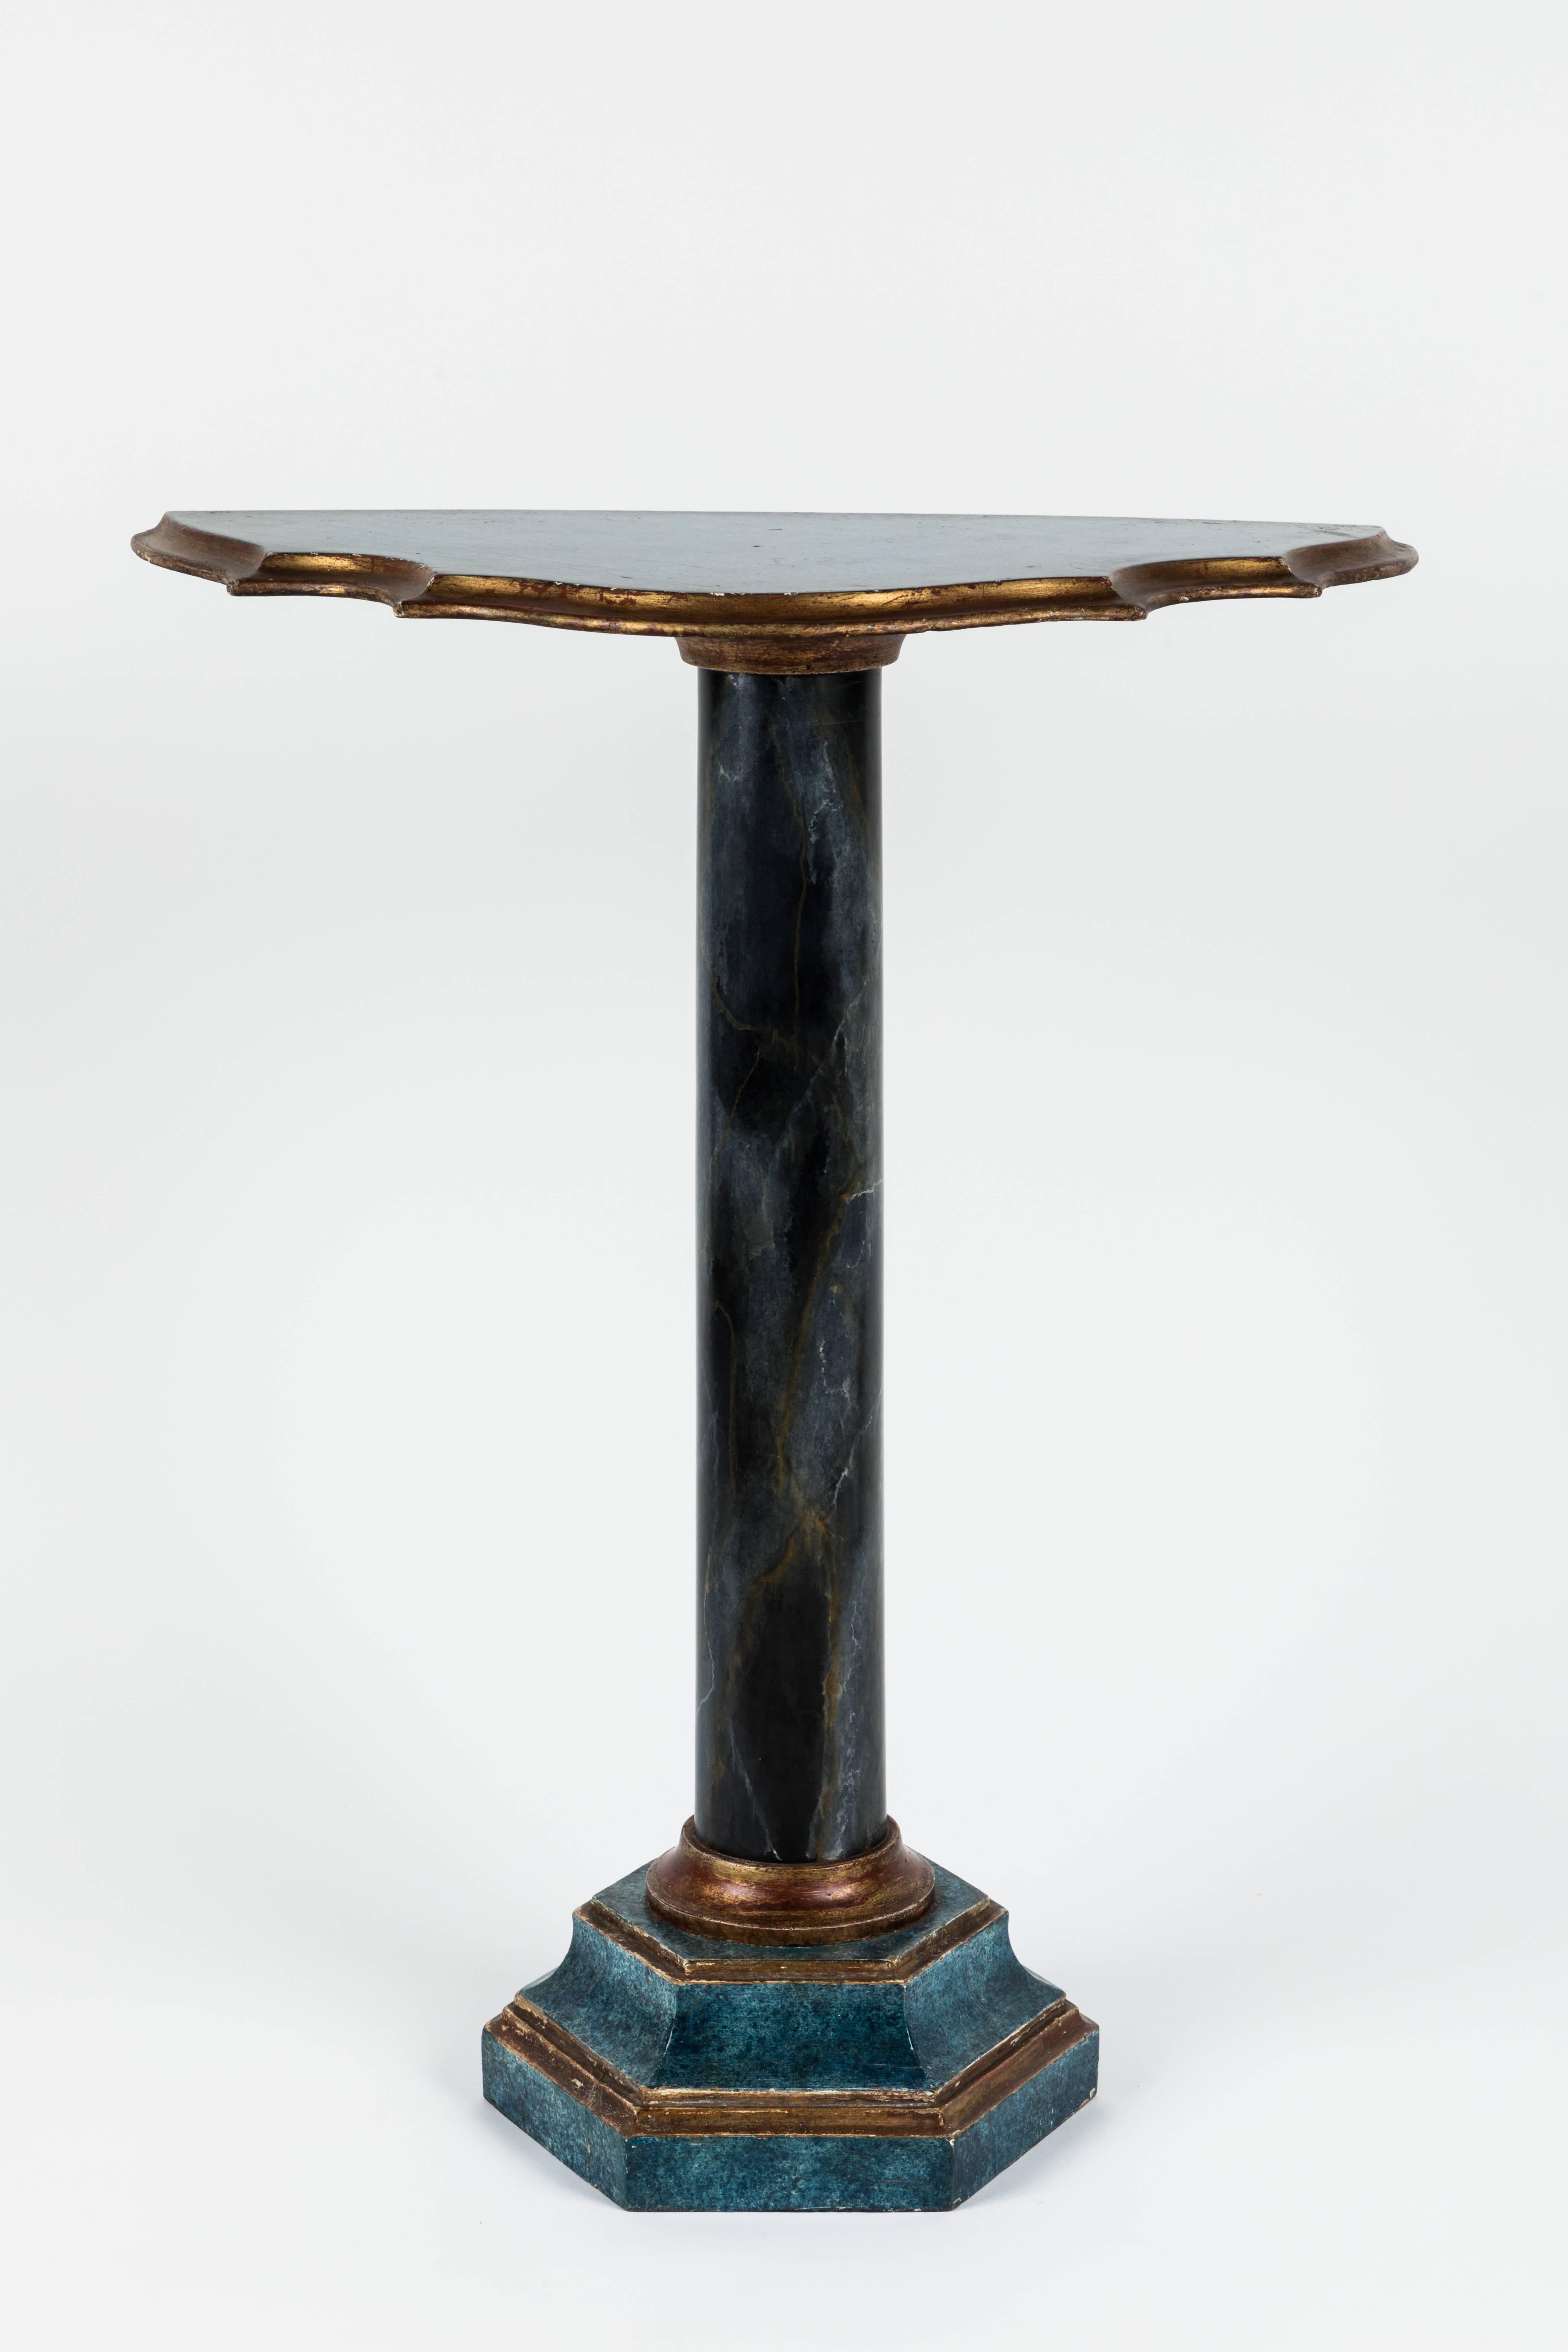 Italian console table finished with polychrome blue in color with partial gilt accents, petite scale table using antique parts.
Scalloped edging on table top, with tiered base.


  